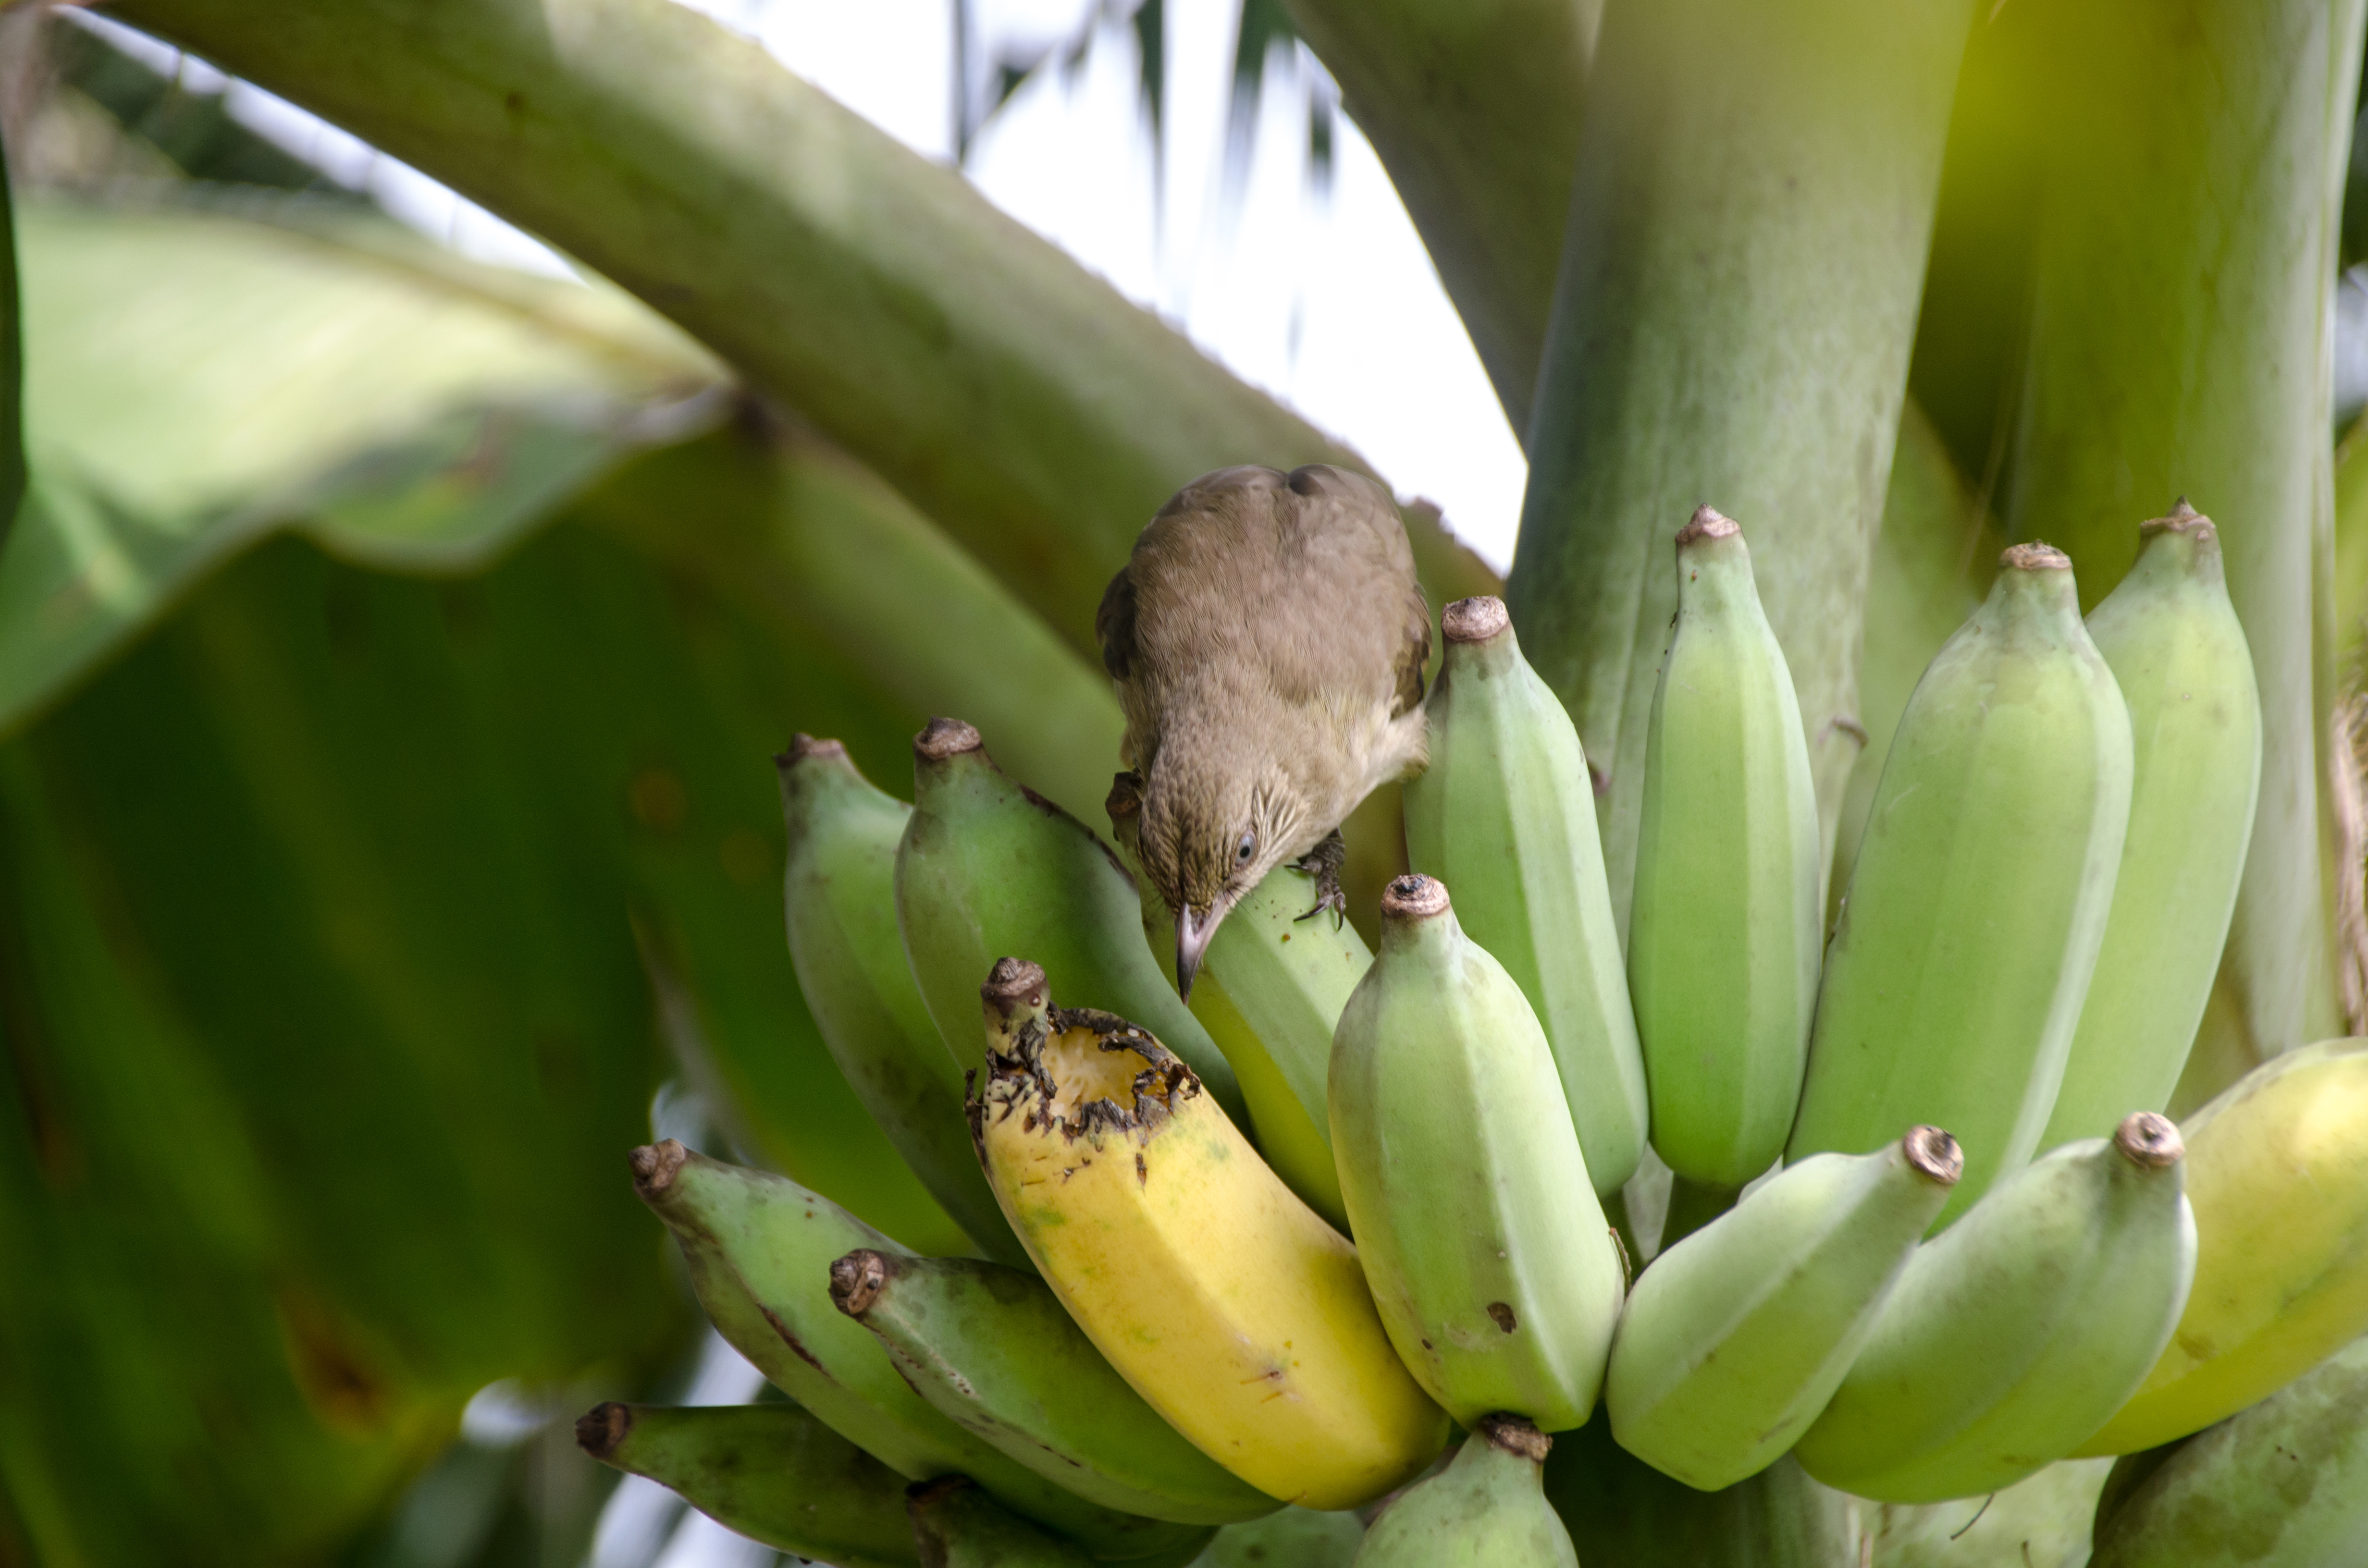 How Long Does it Take for a Banana Flower to Become a Fruit? | Hunker